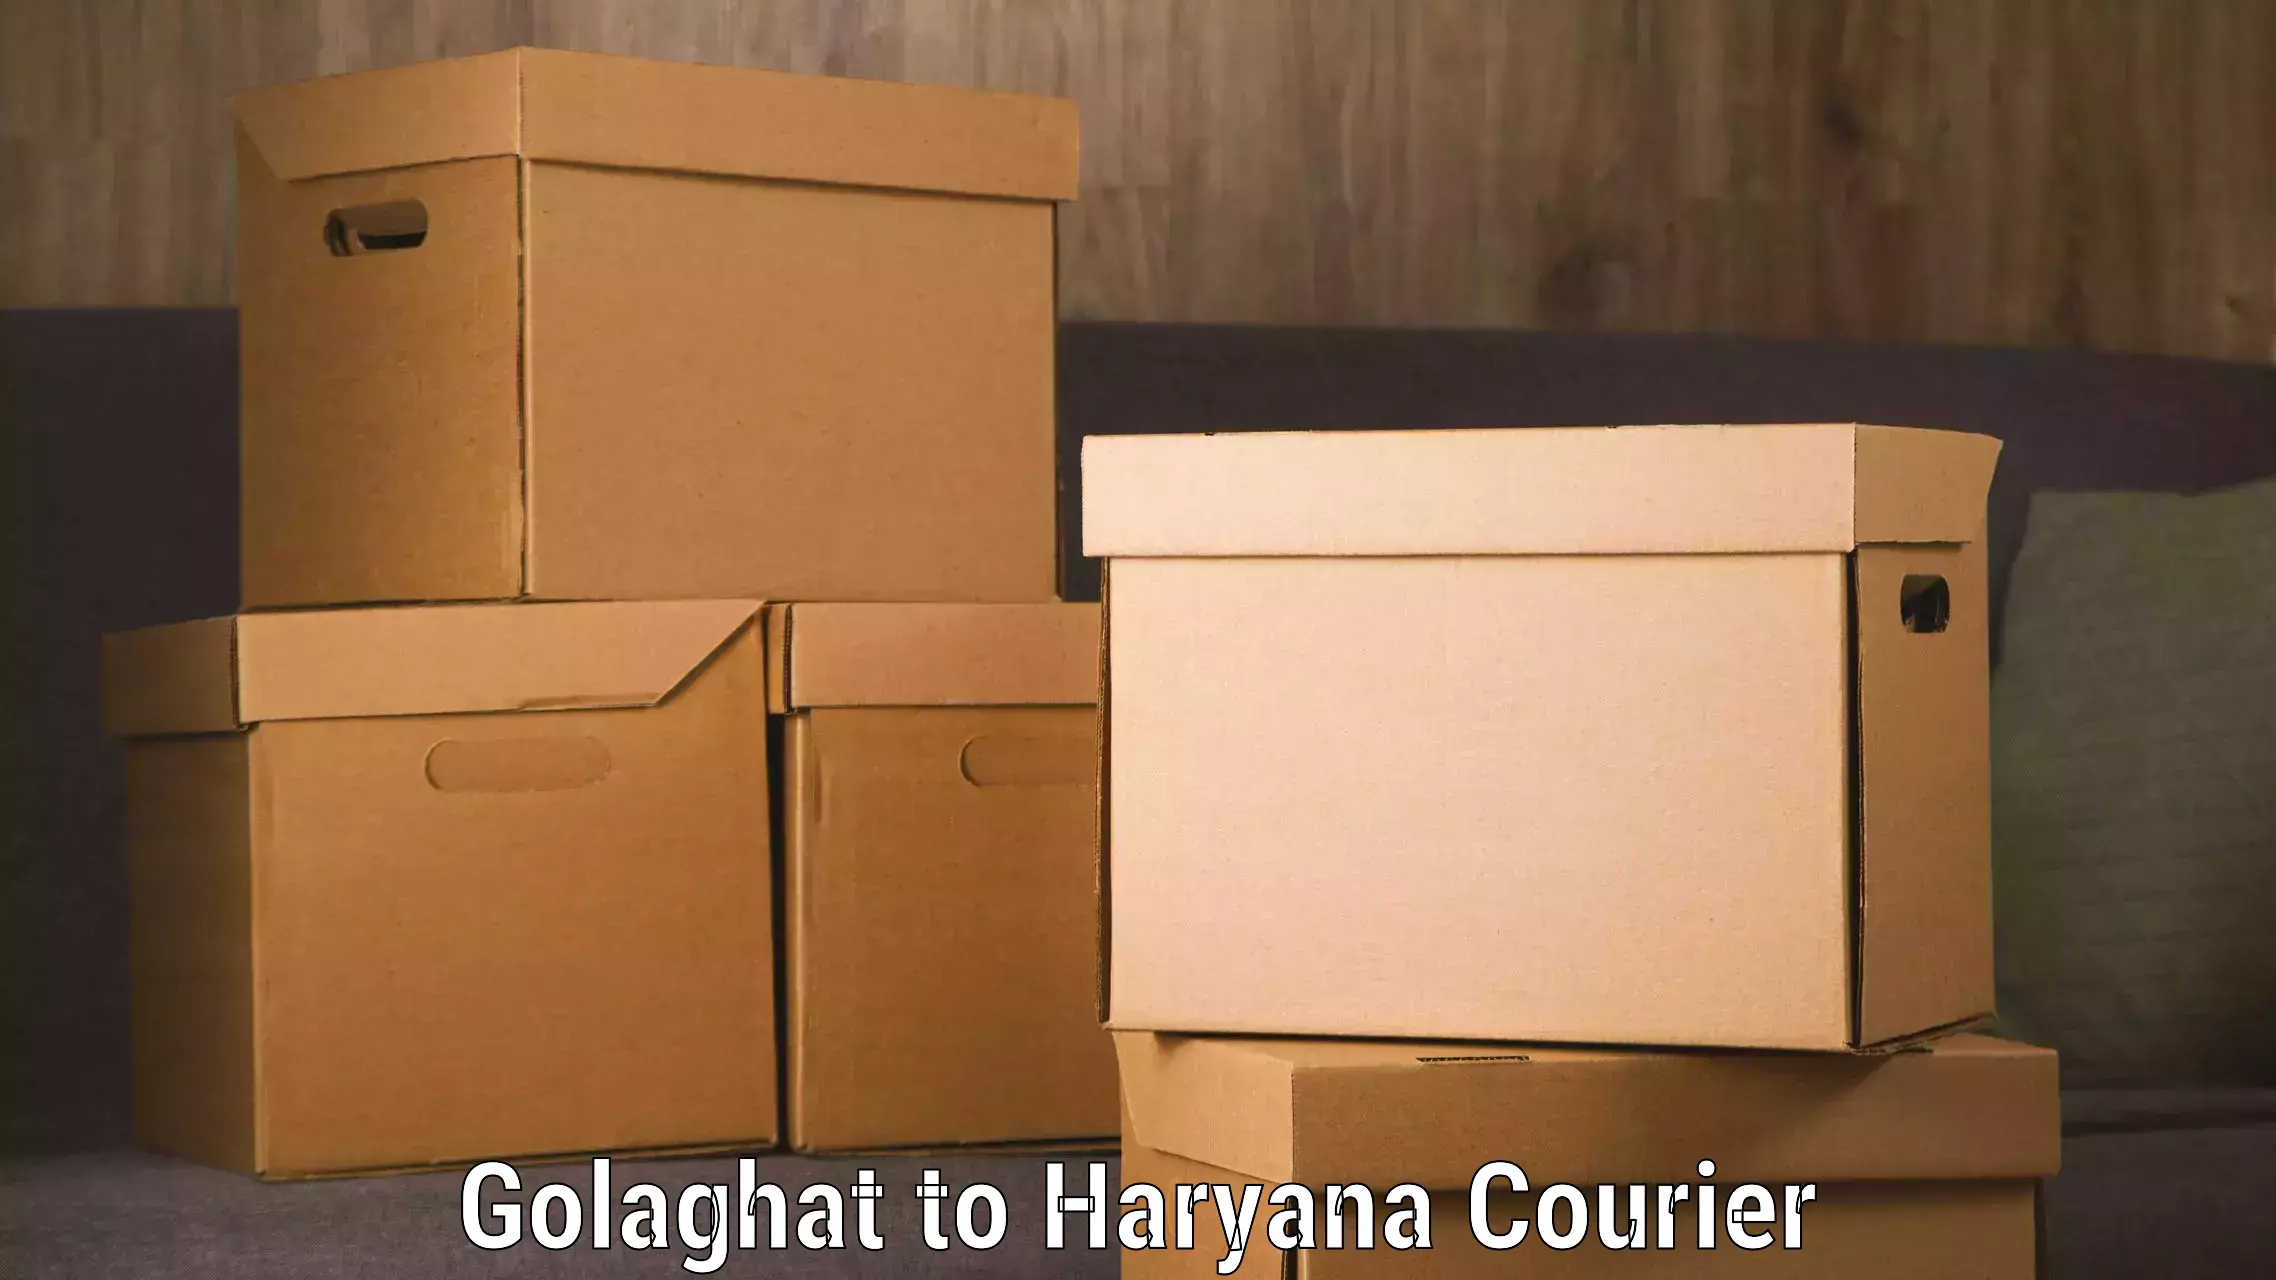 Luggage shipment tracking in Golaghat to NCR Haryana